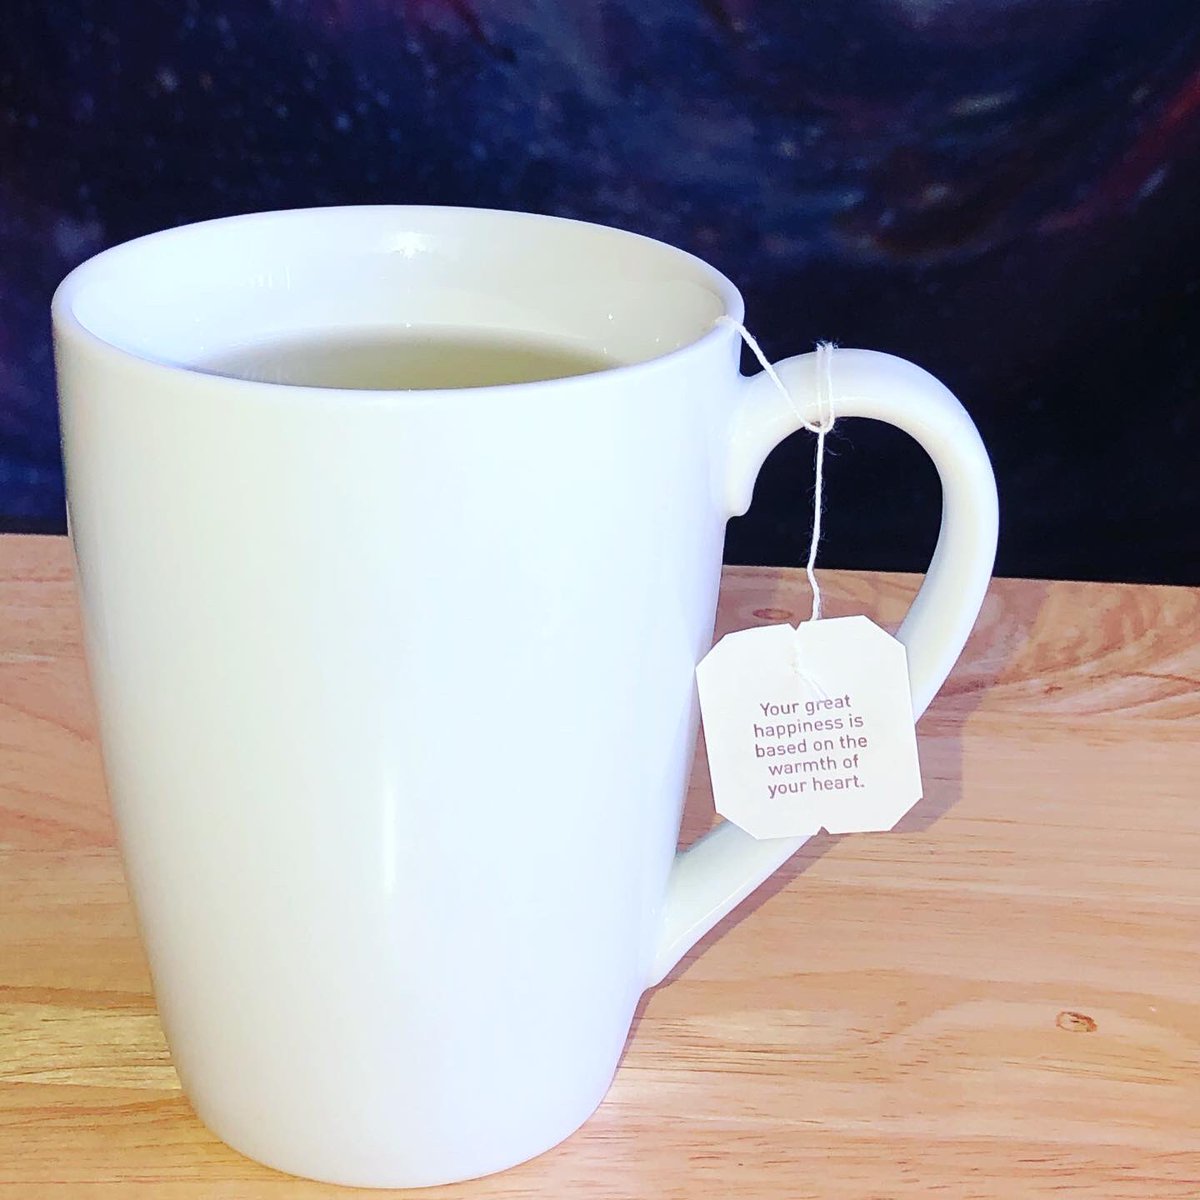 “Your great happiness is based on the warmth of your heart” 🧡💖 #yogitea #multiplesclerosis #wahlsprotocol